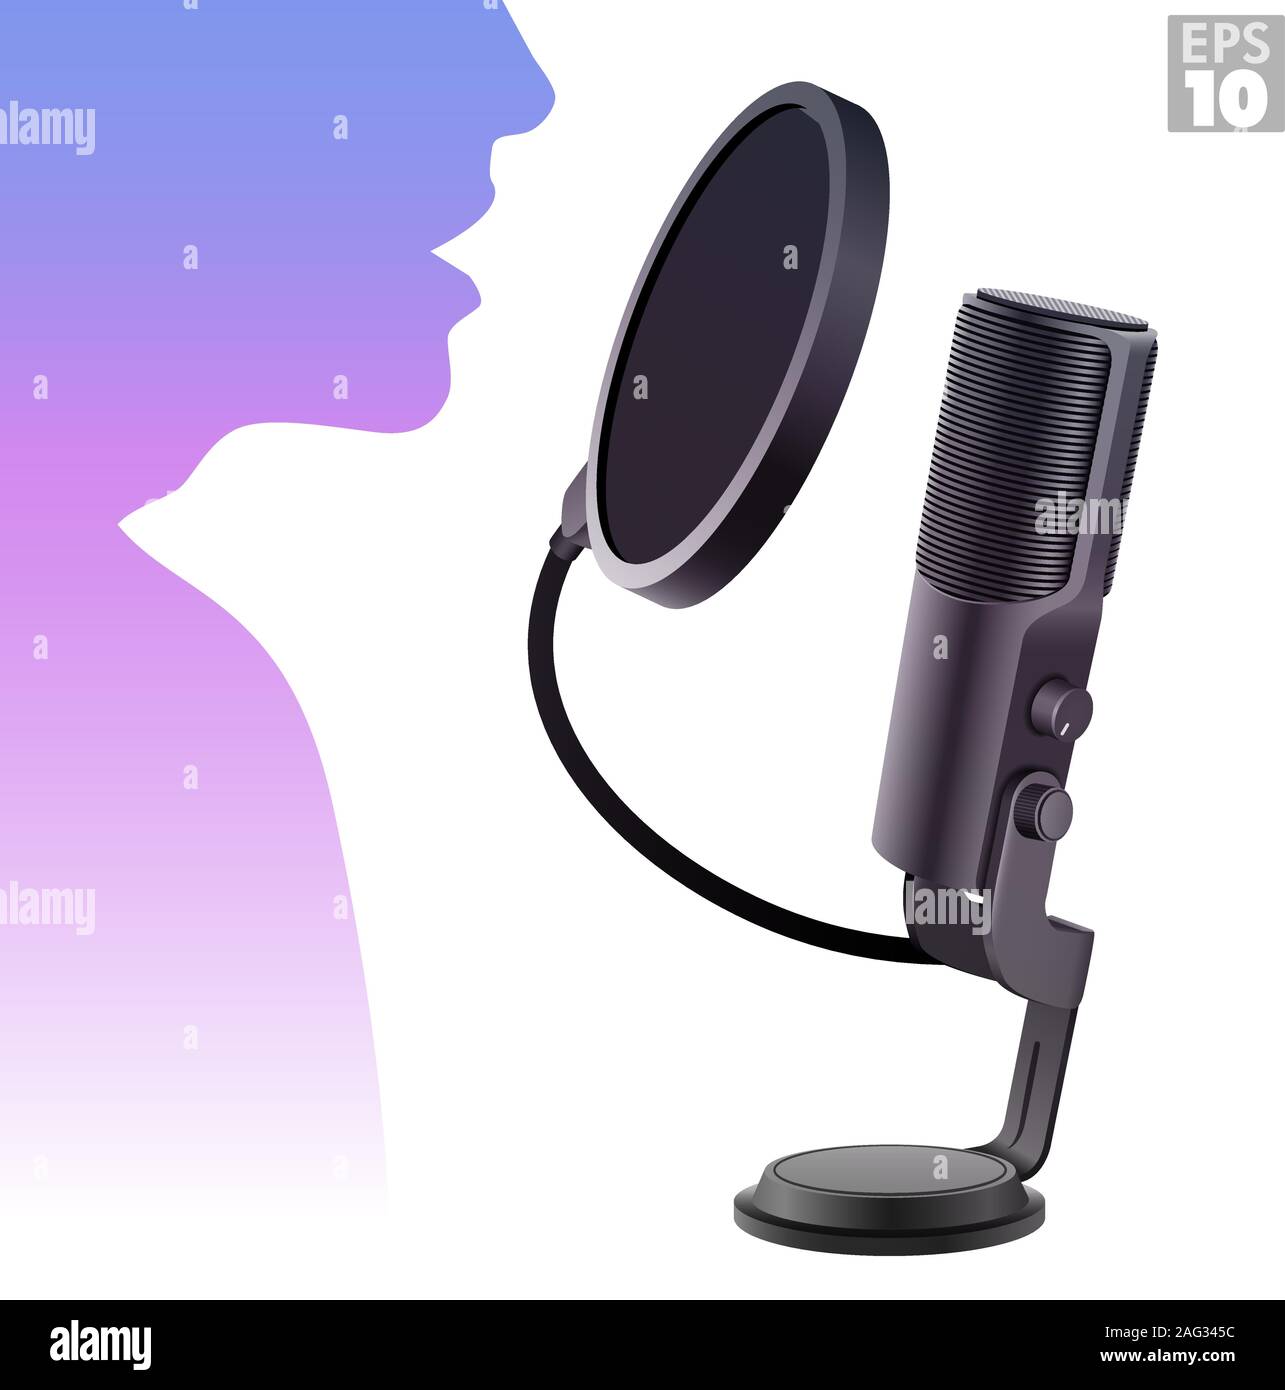 Condenser microphone with pop filter and stand used by a person for voice-overs or podcast vocal recordings. Stock Vector